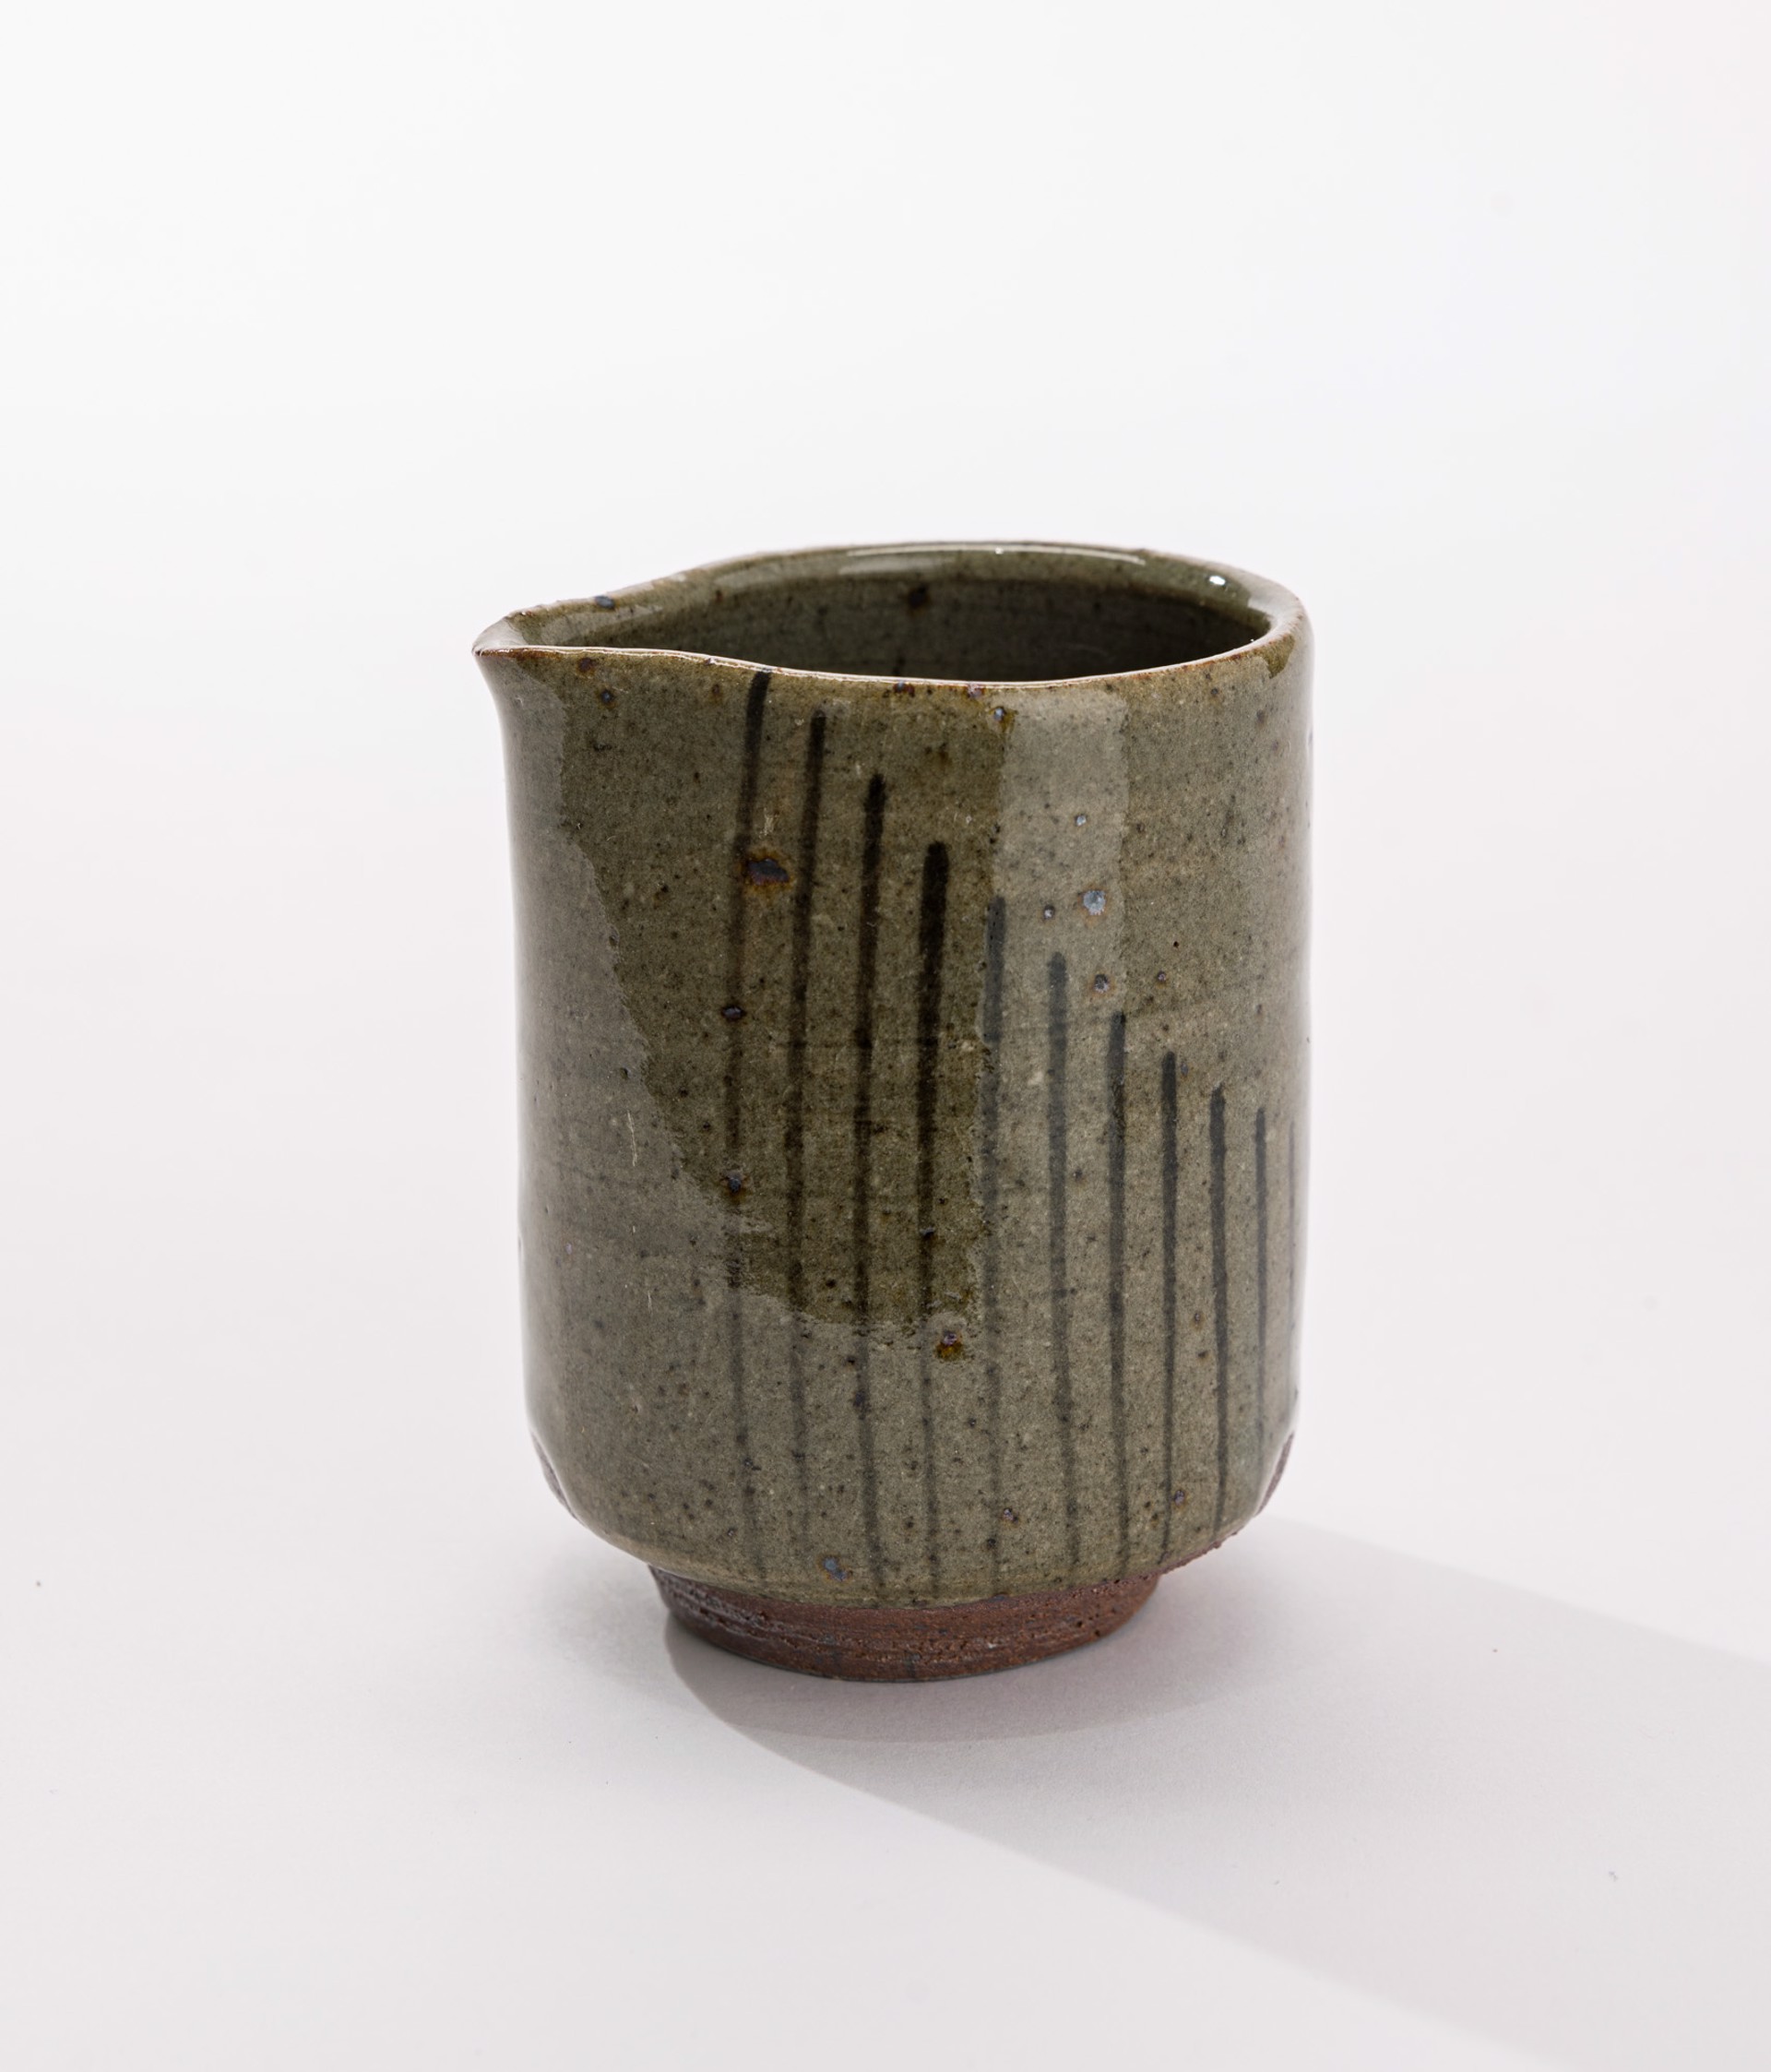 native NM clay creamer with escalator lines by Betsy Williams